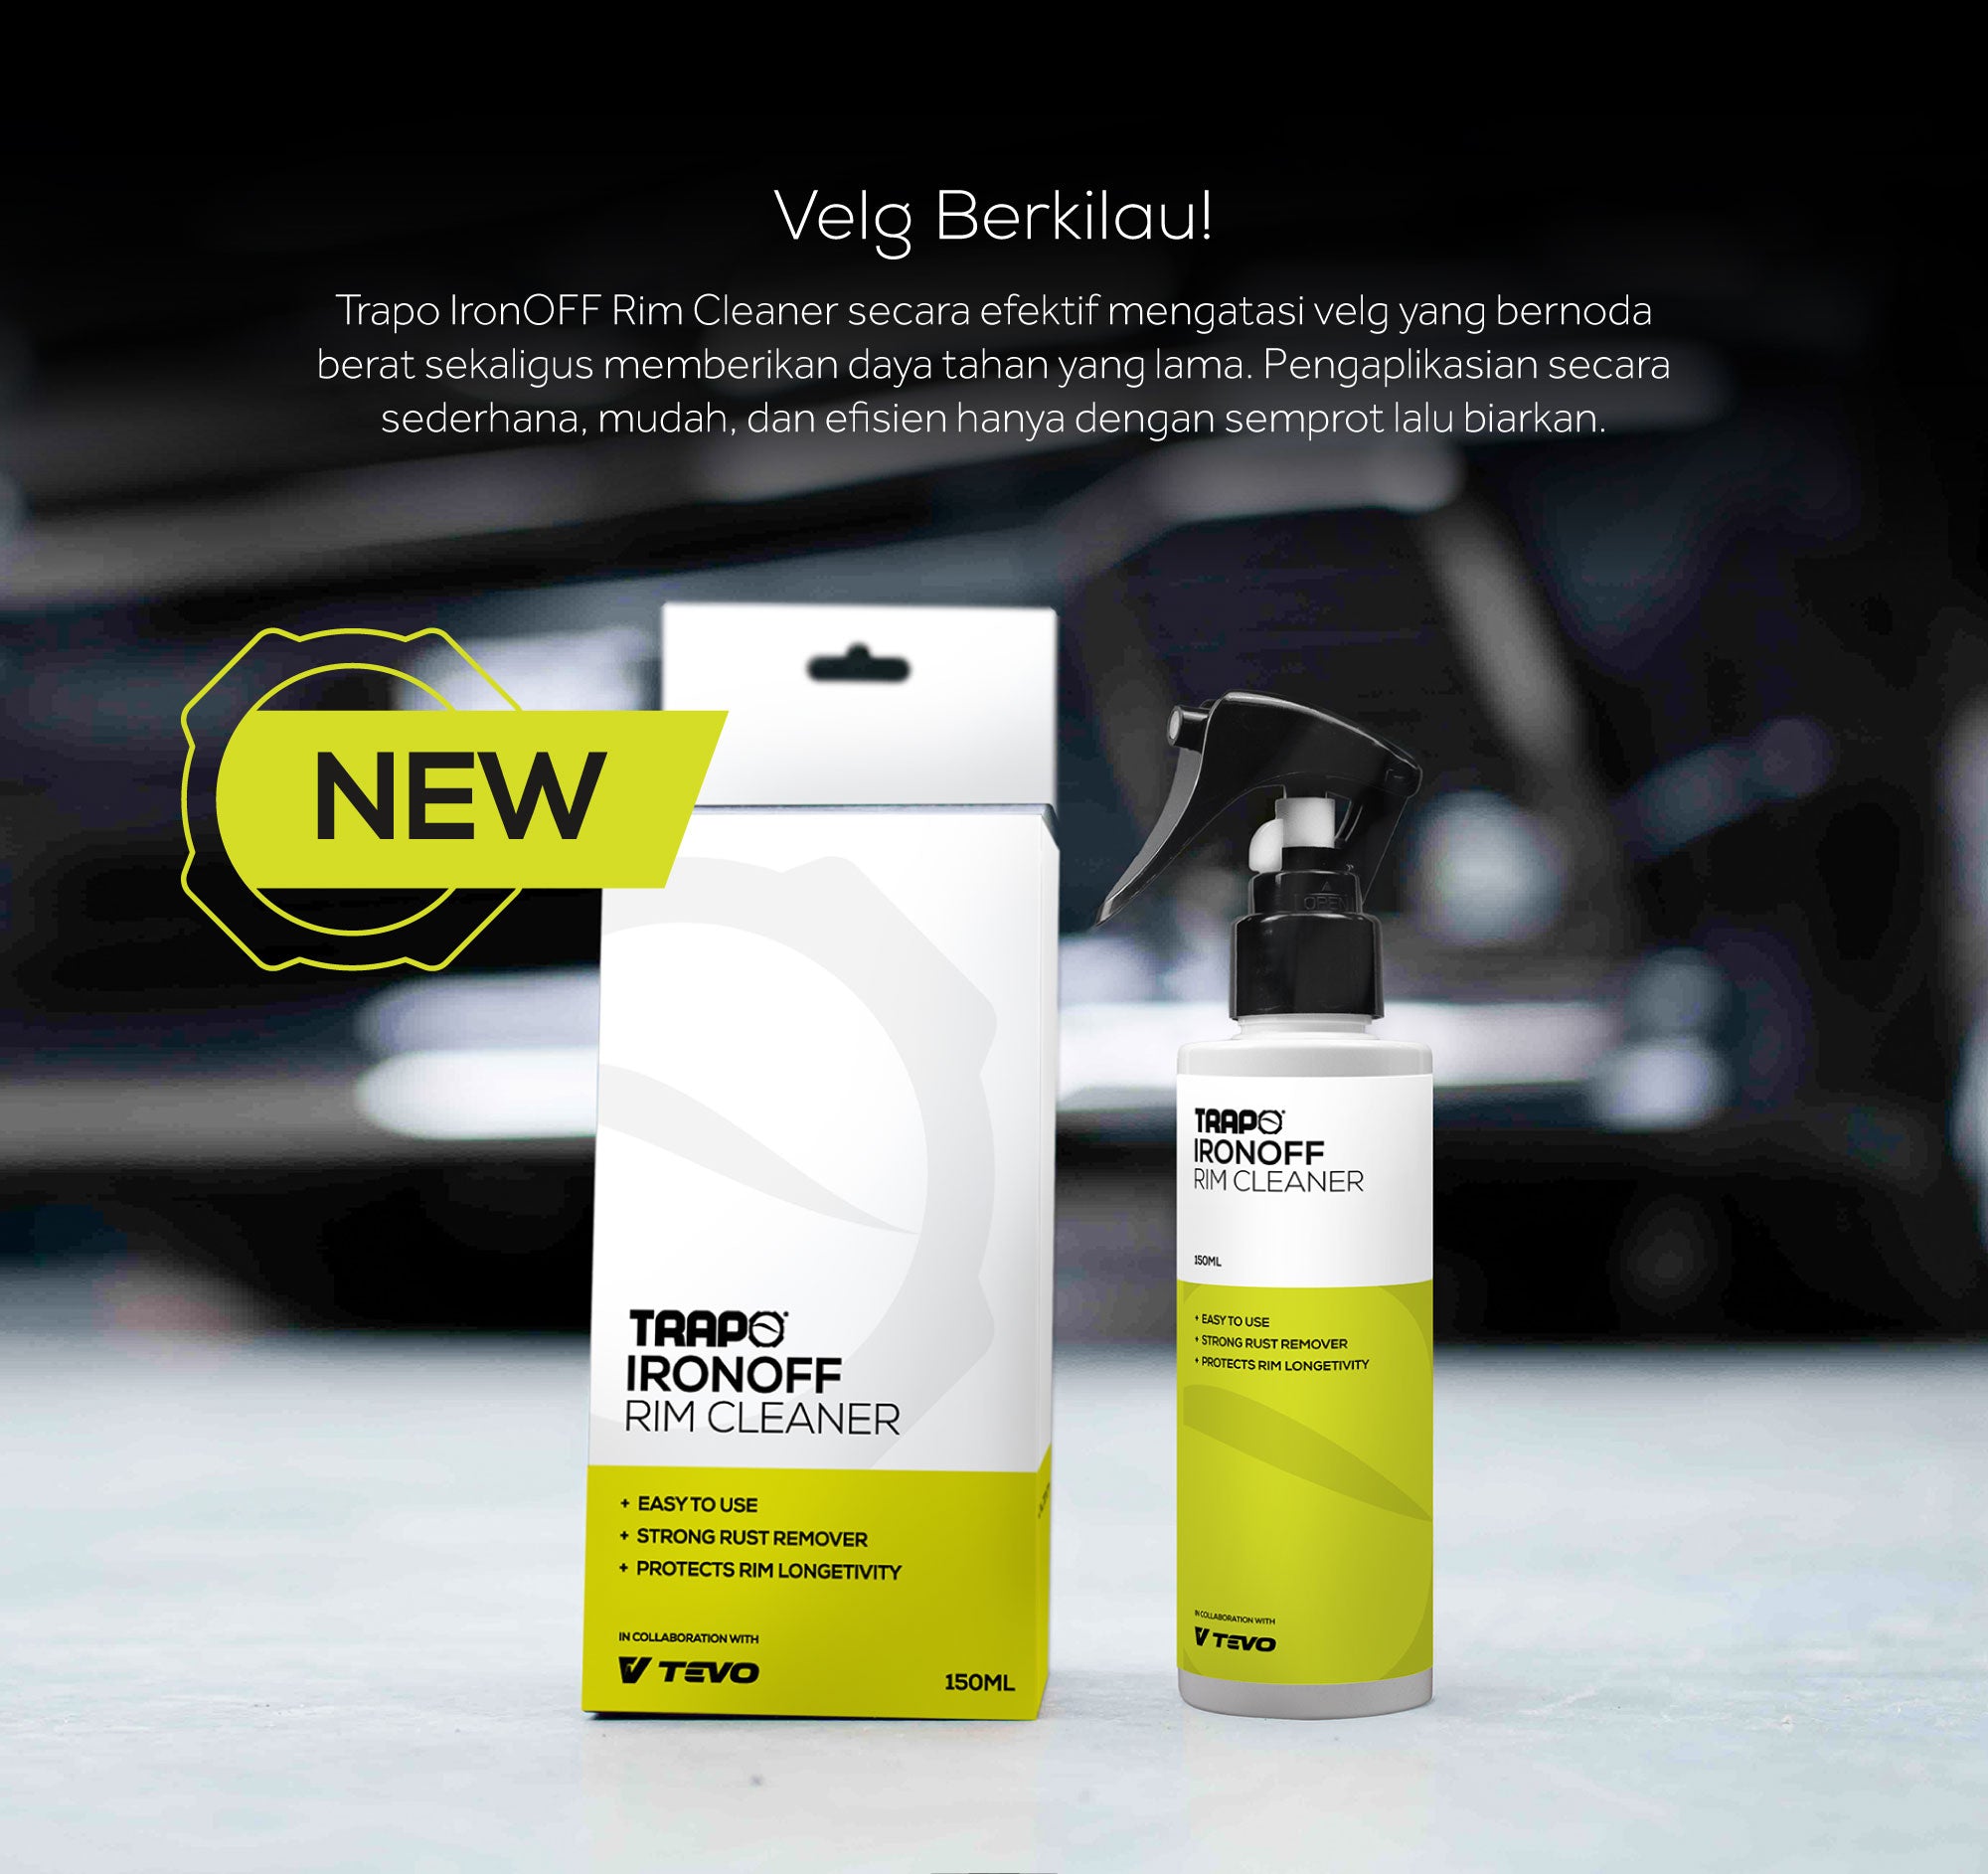 Shine and protects.The Oxtra Shineguard Car Coating is a car protective coating with a durability of up to 3 months that provides 3-in 1 protection such as improve gloss,waterbeading and UV protection against harsh weather conditions